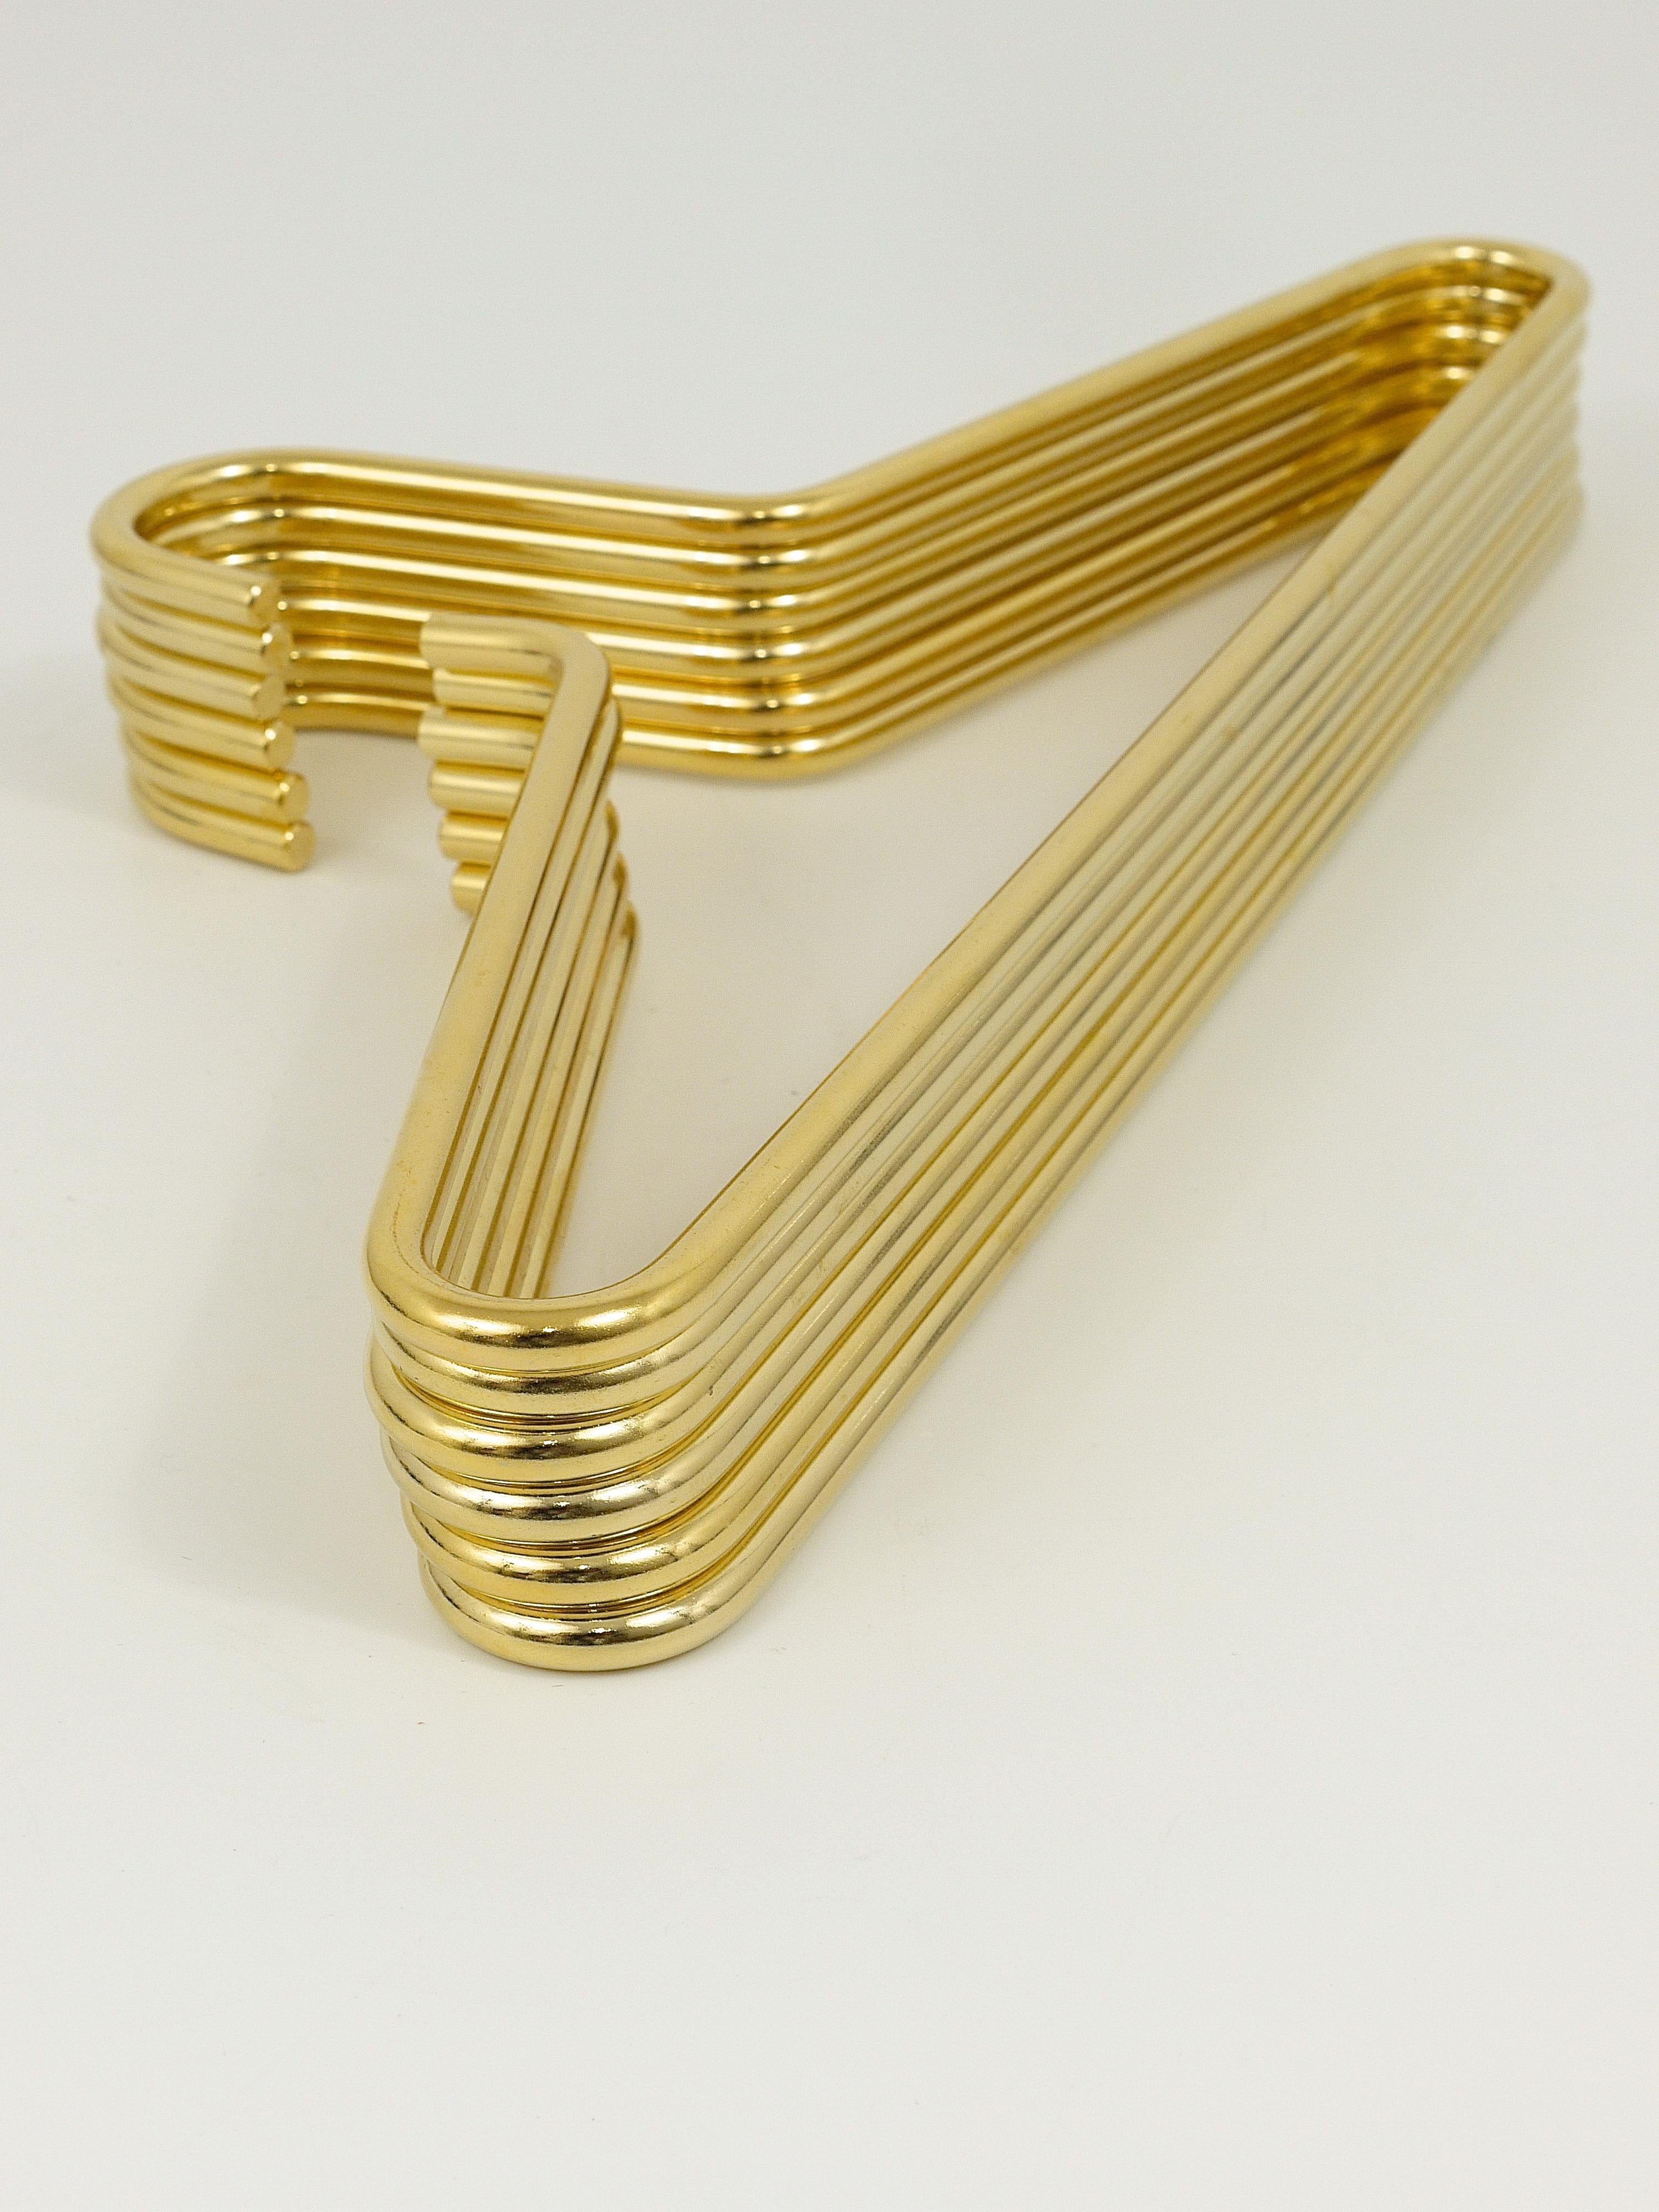 Up to 12 Austrian Modernist Solid Gold-Plated Coat Hangers from the 1970s In Good Condition For Sale In Vienna, AT